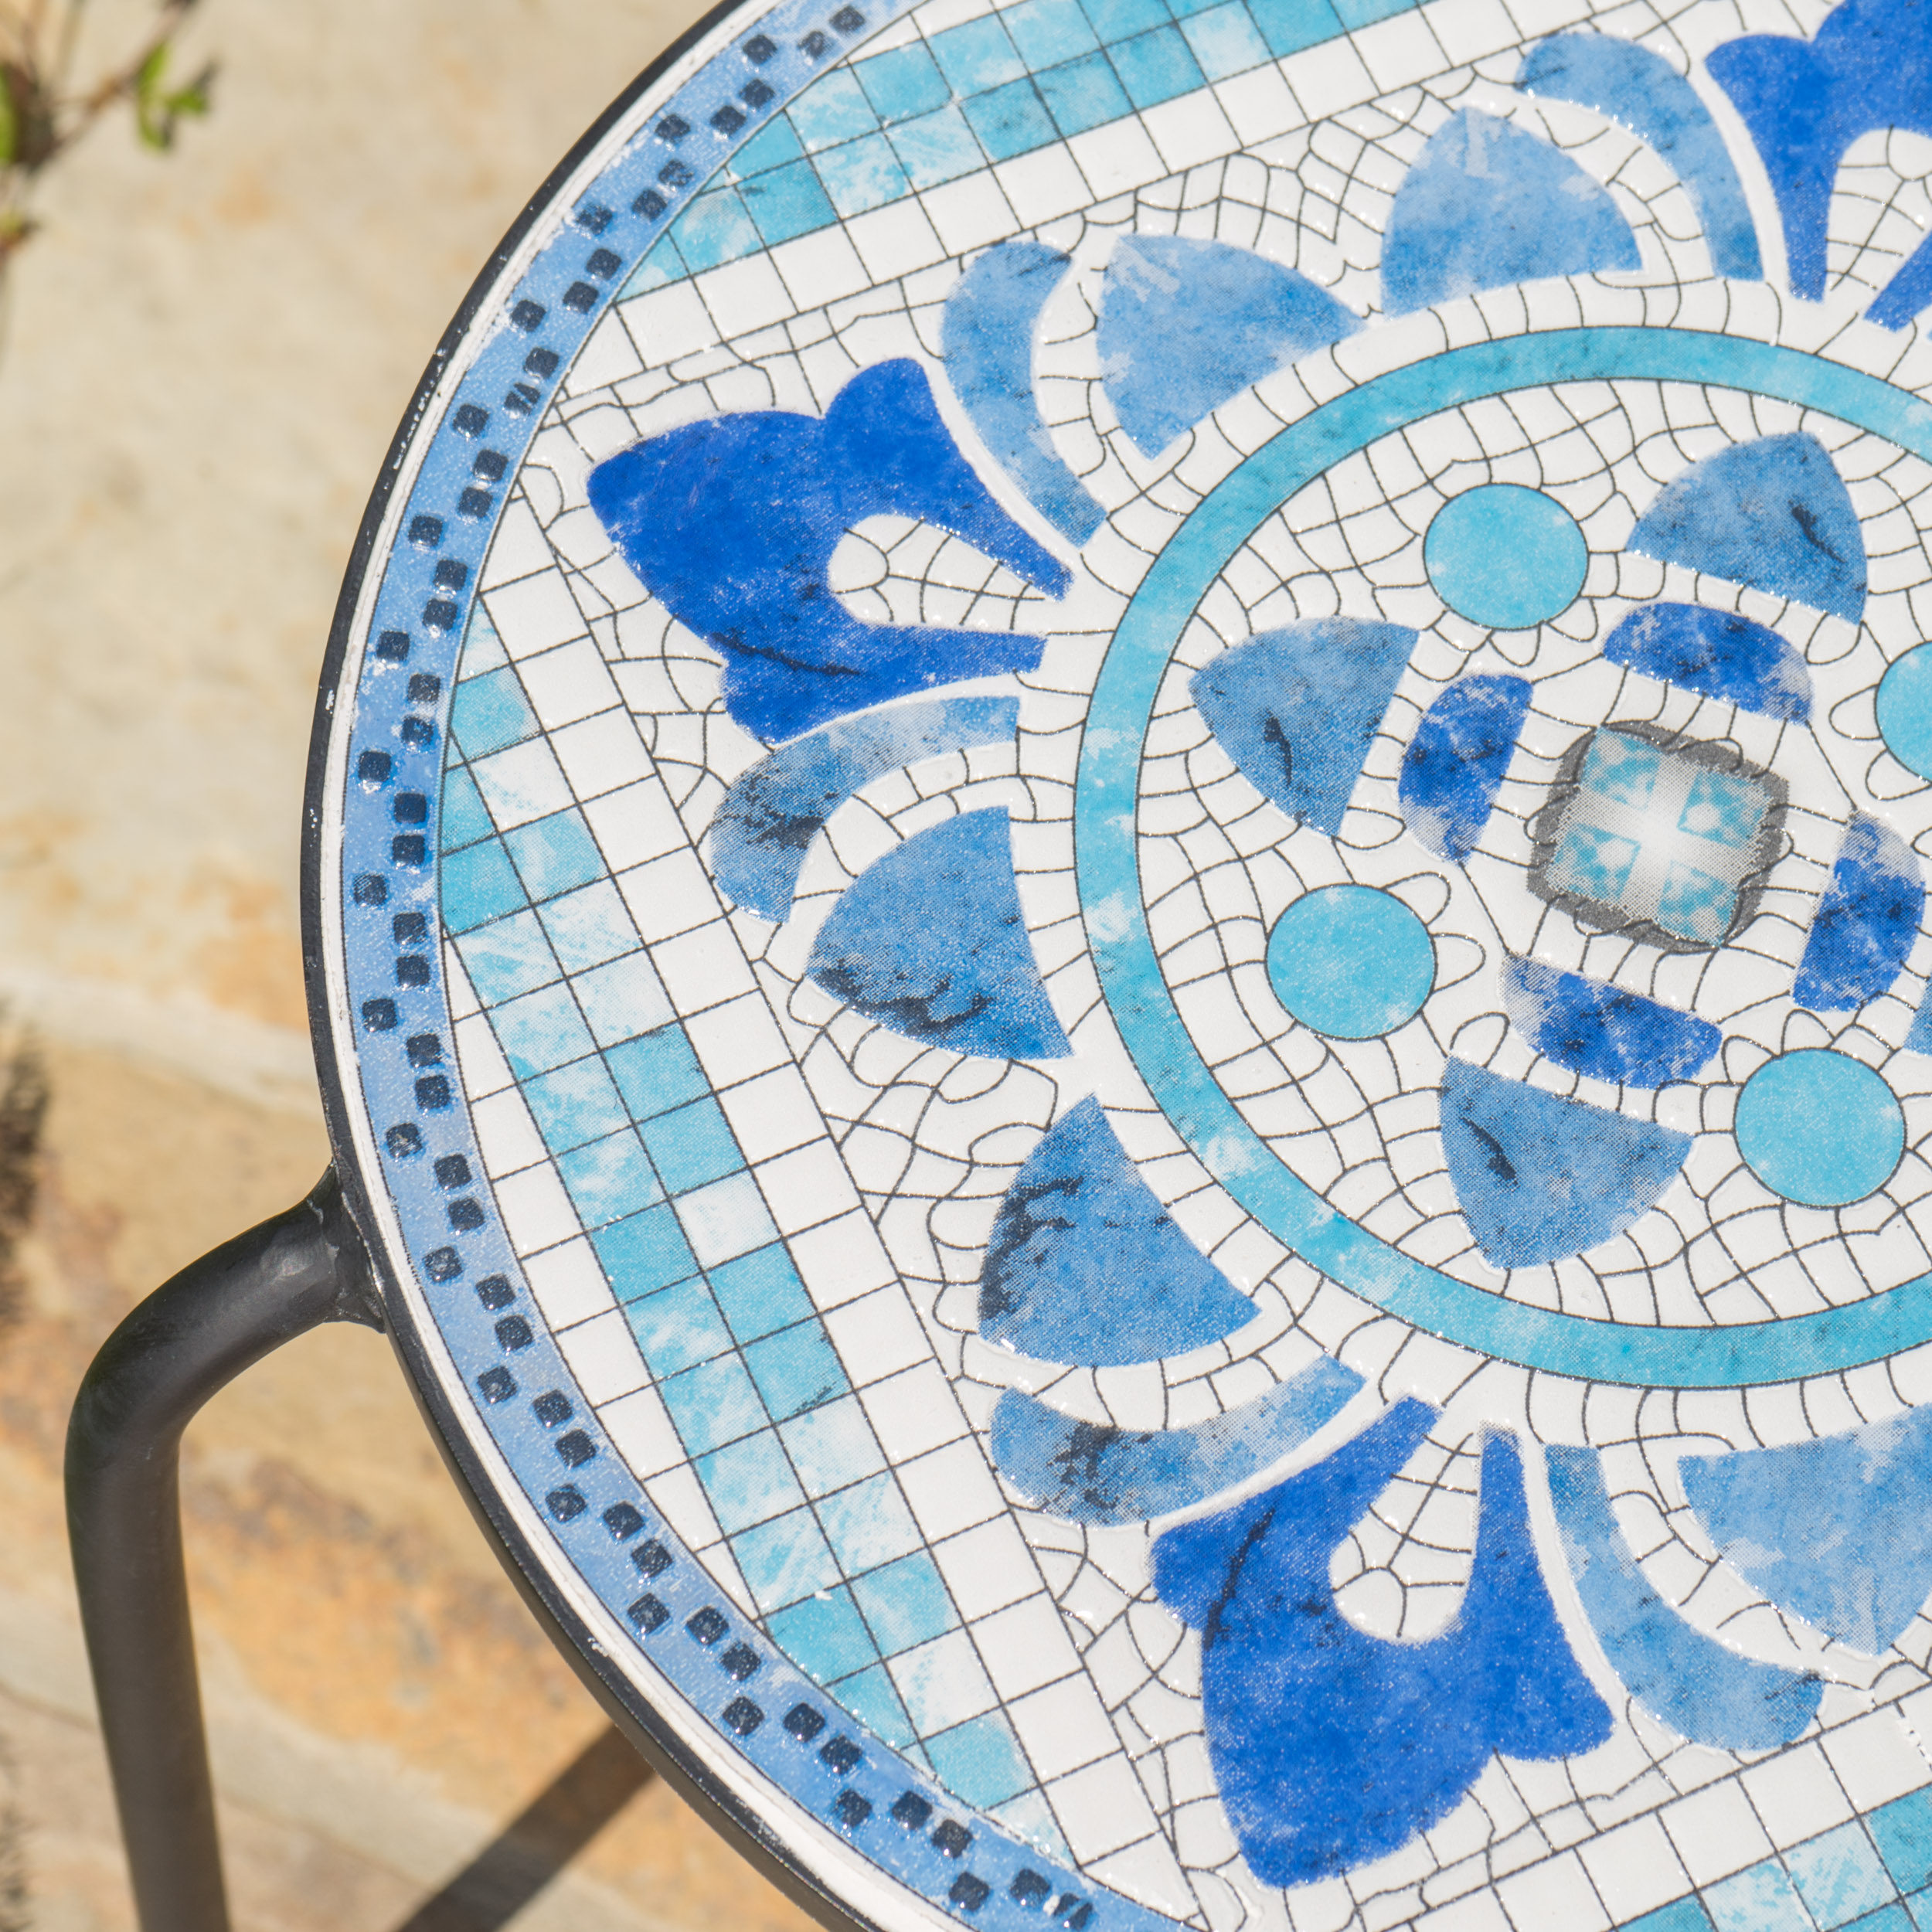 Sindarin Outdoor Ceramic Tile Round Side Table, Blue and White - image 5 of 5